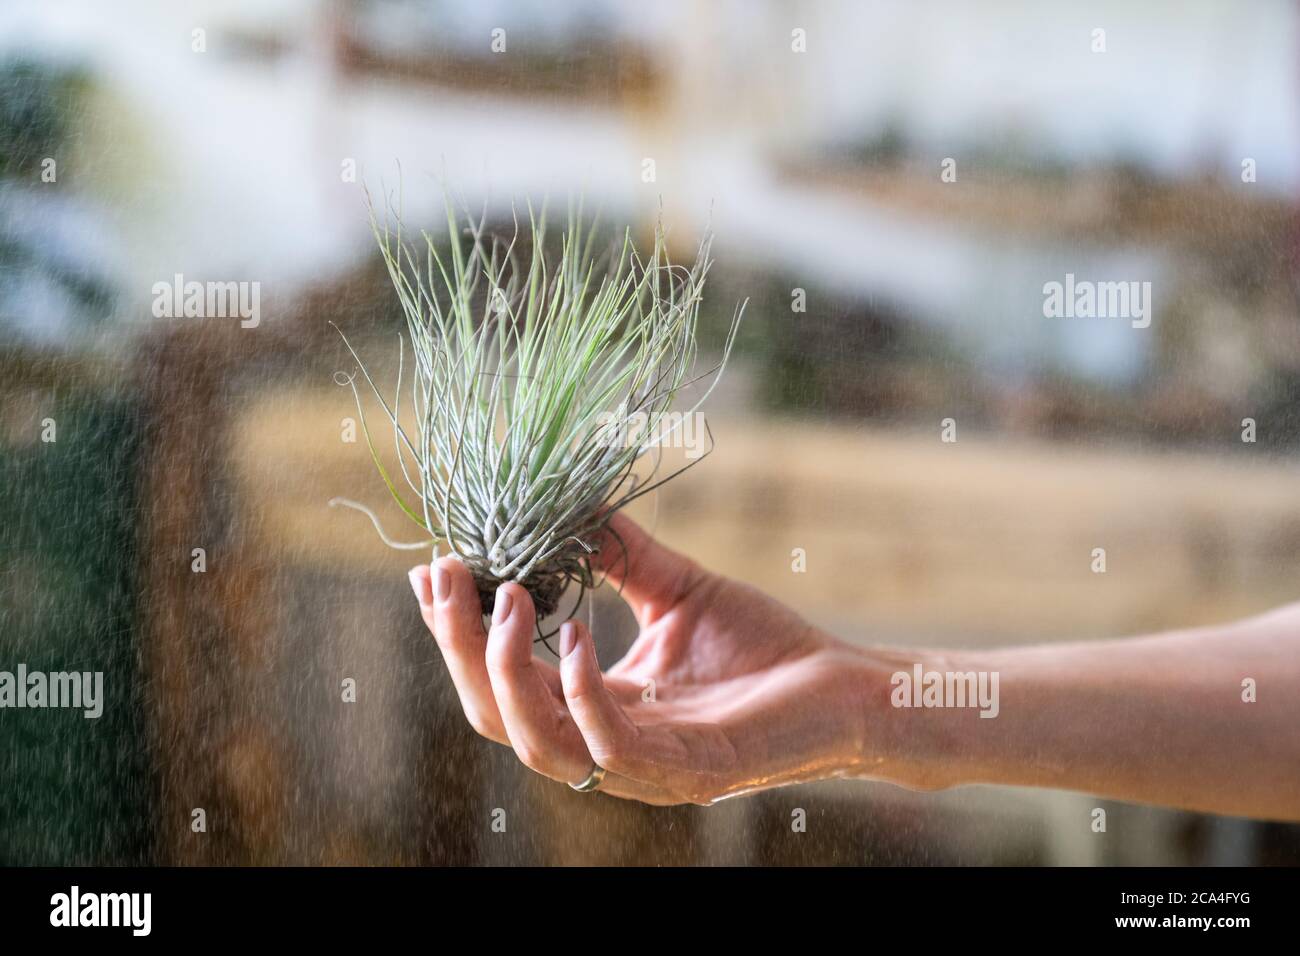 Close up of woman florist holding in her wet hand and spraying air plant tillandsia at garden home/greenhouse, taking care of houseplants. Indoor gard Stock Photo